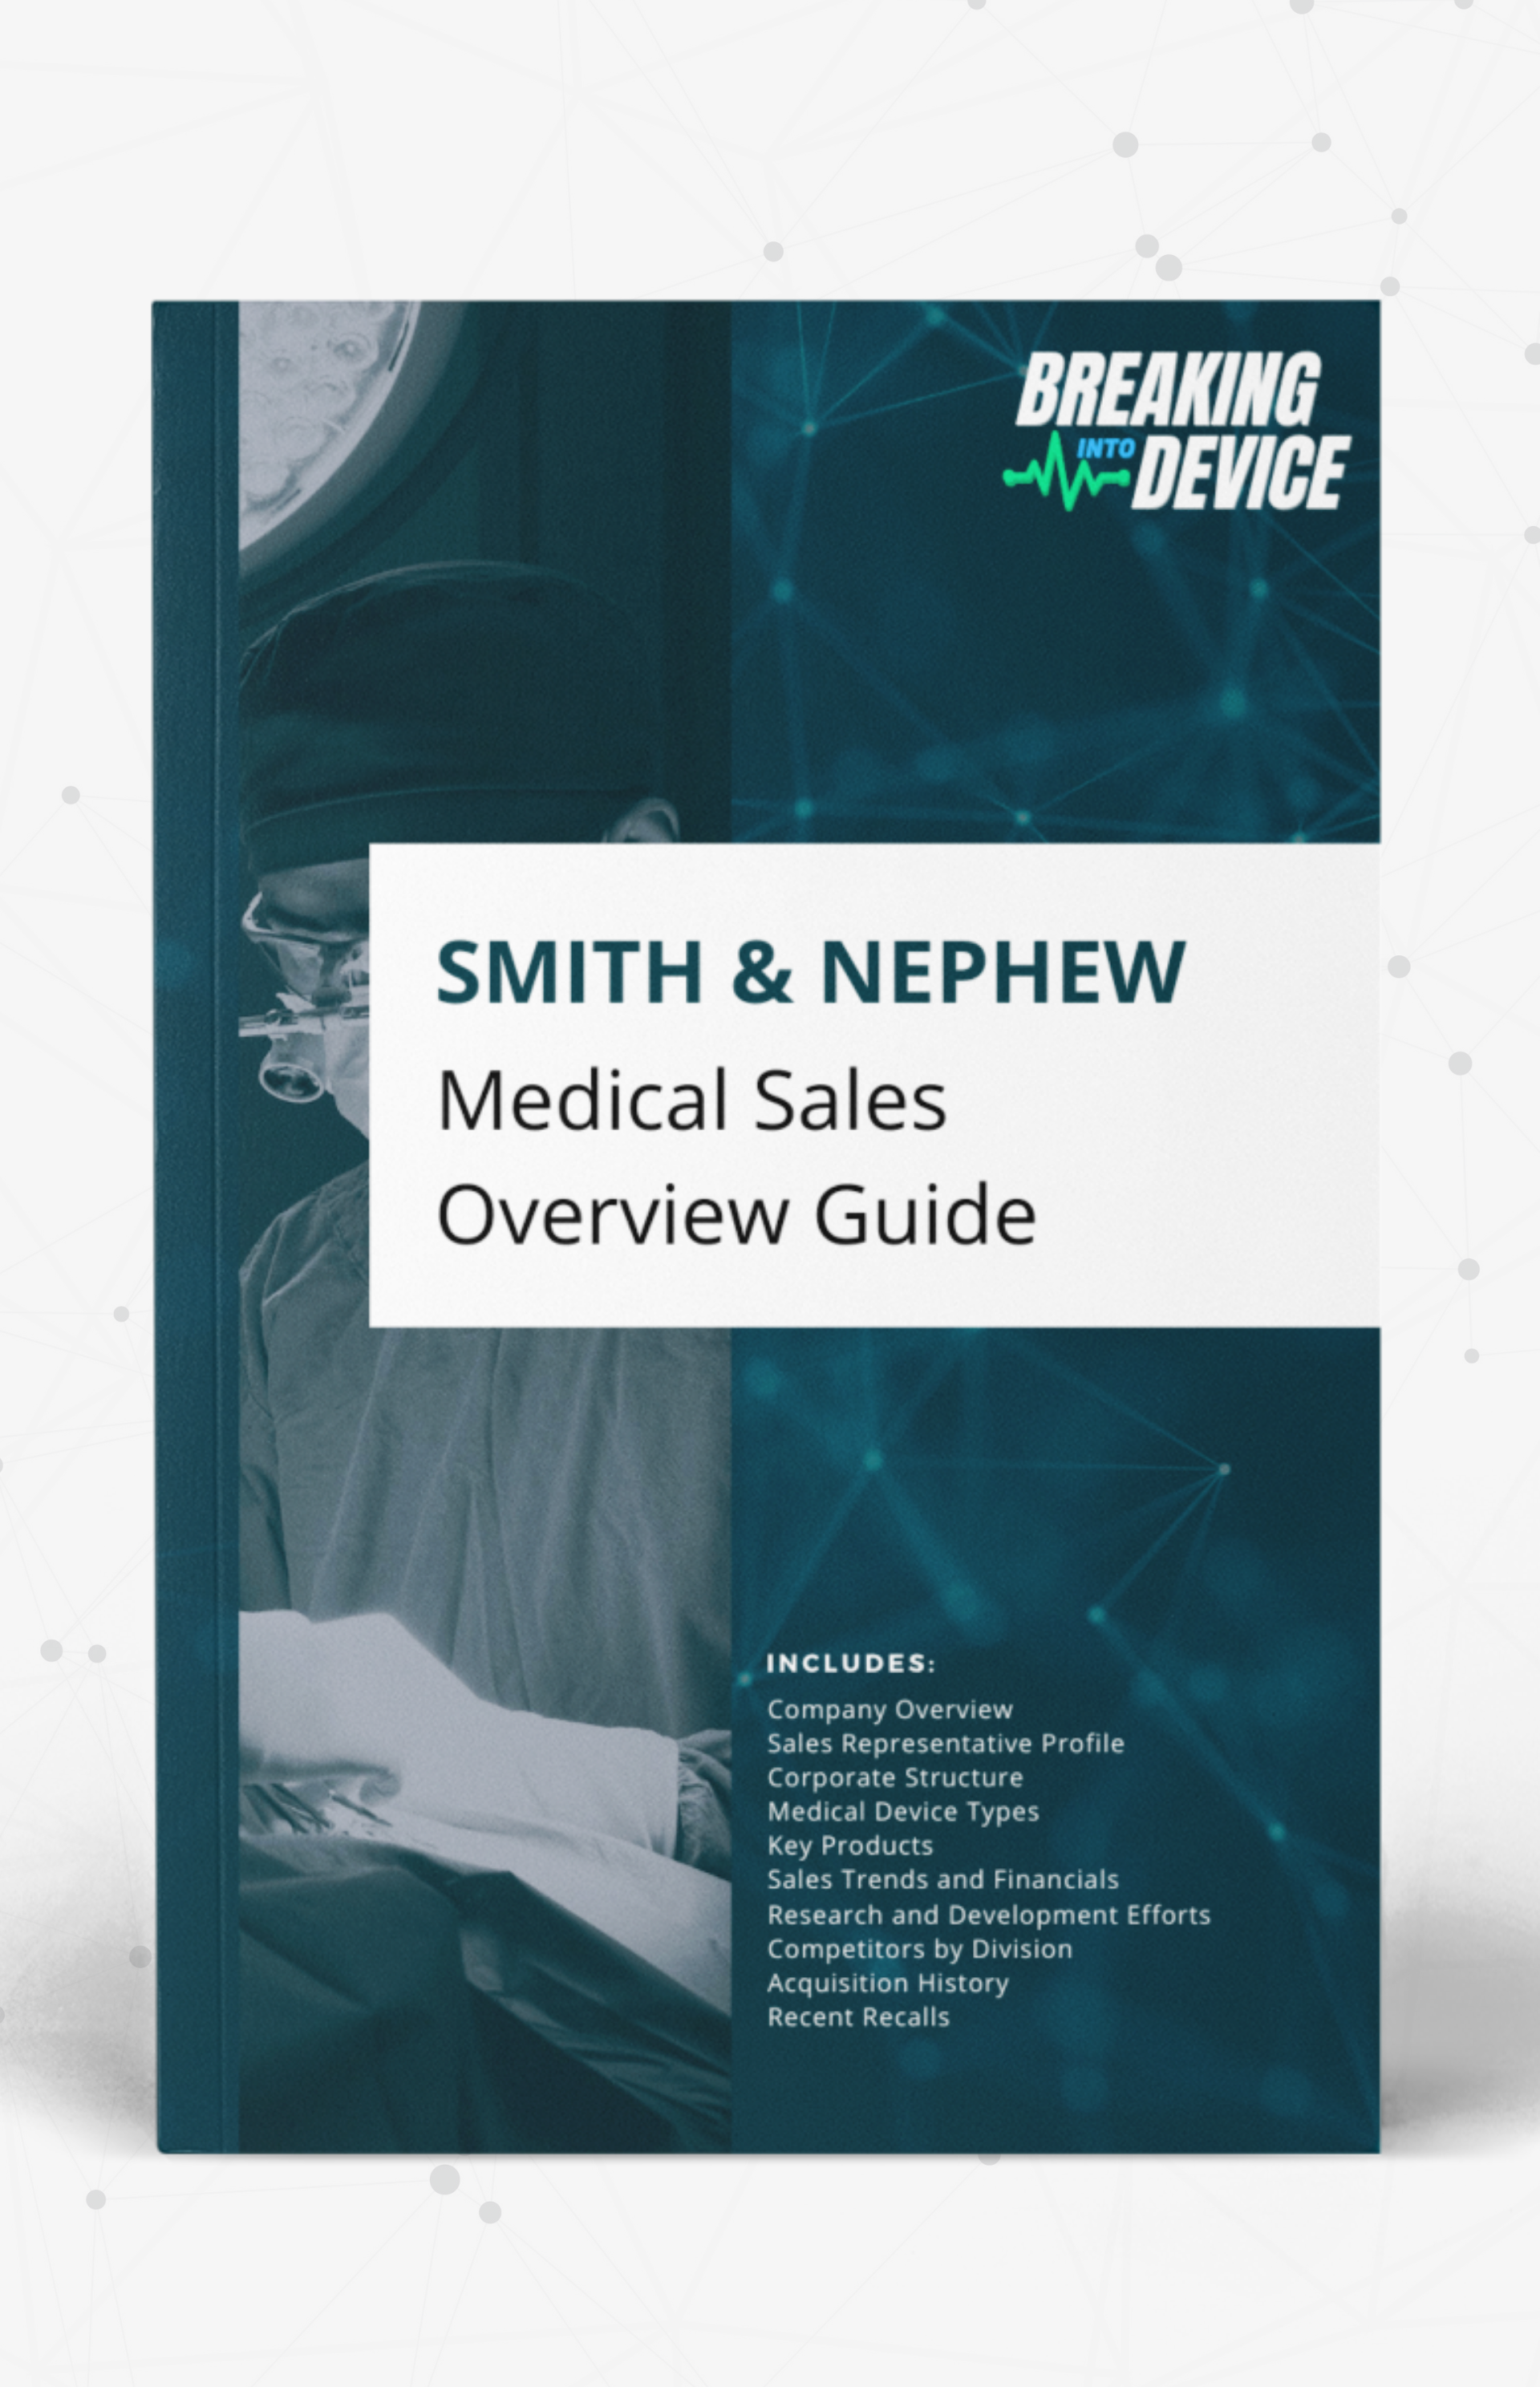 Smith & Nephew Medical Device Sales Overview Guide